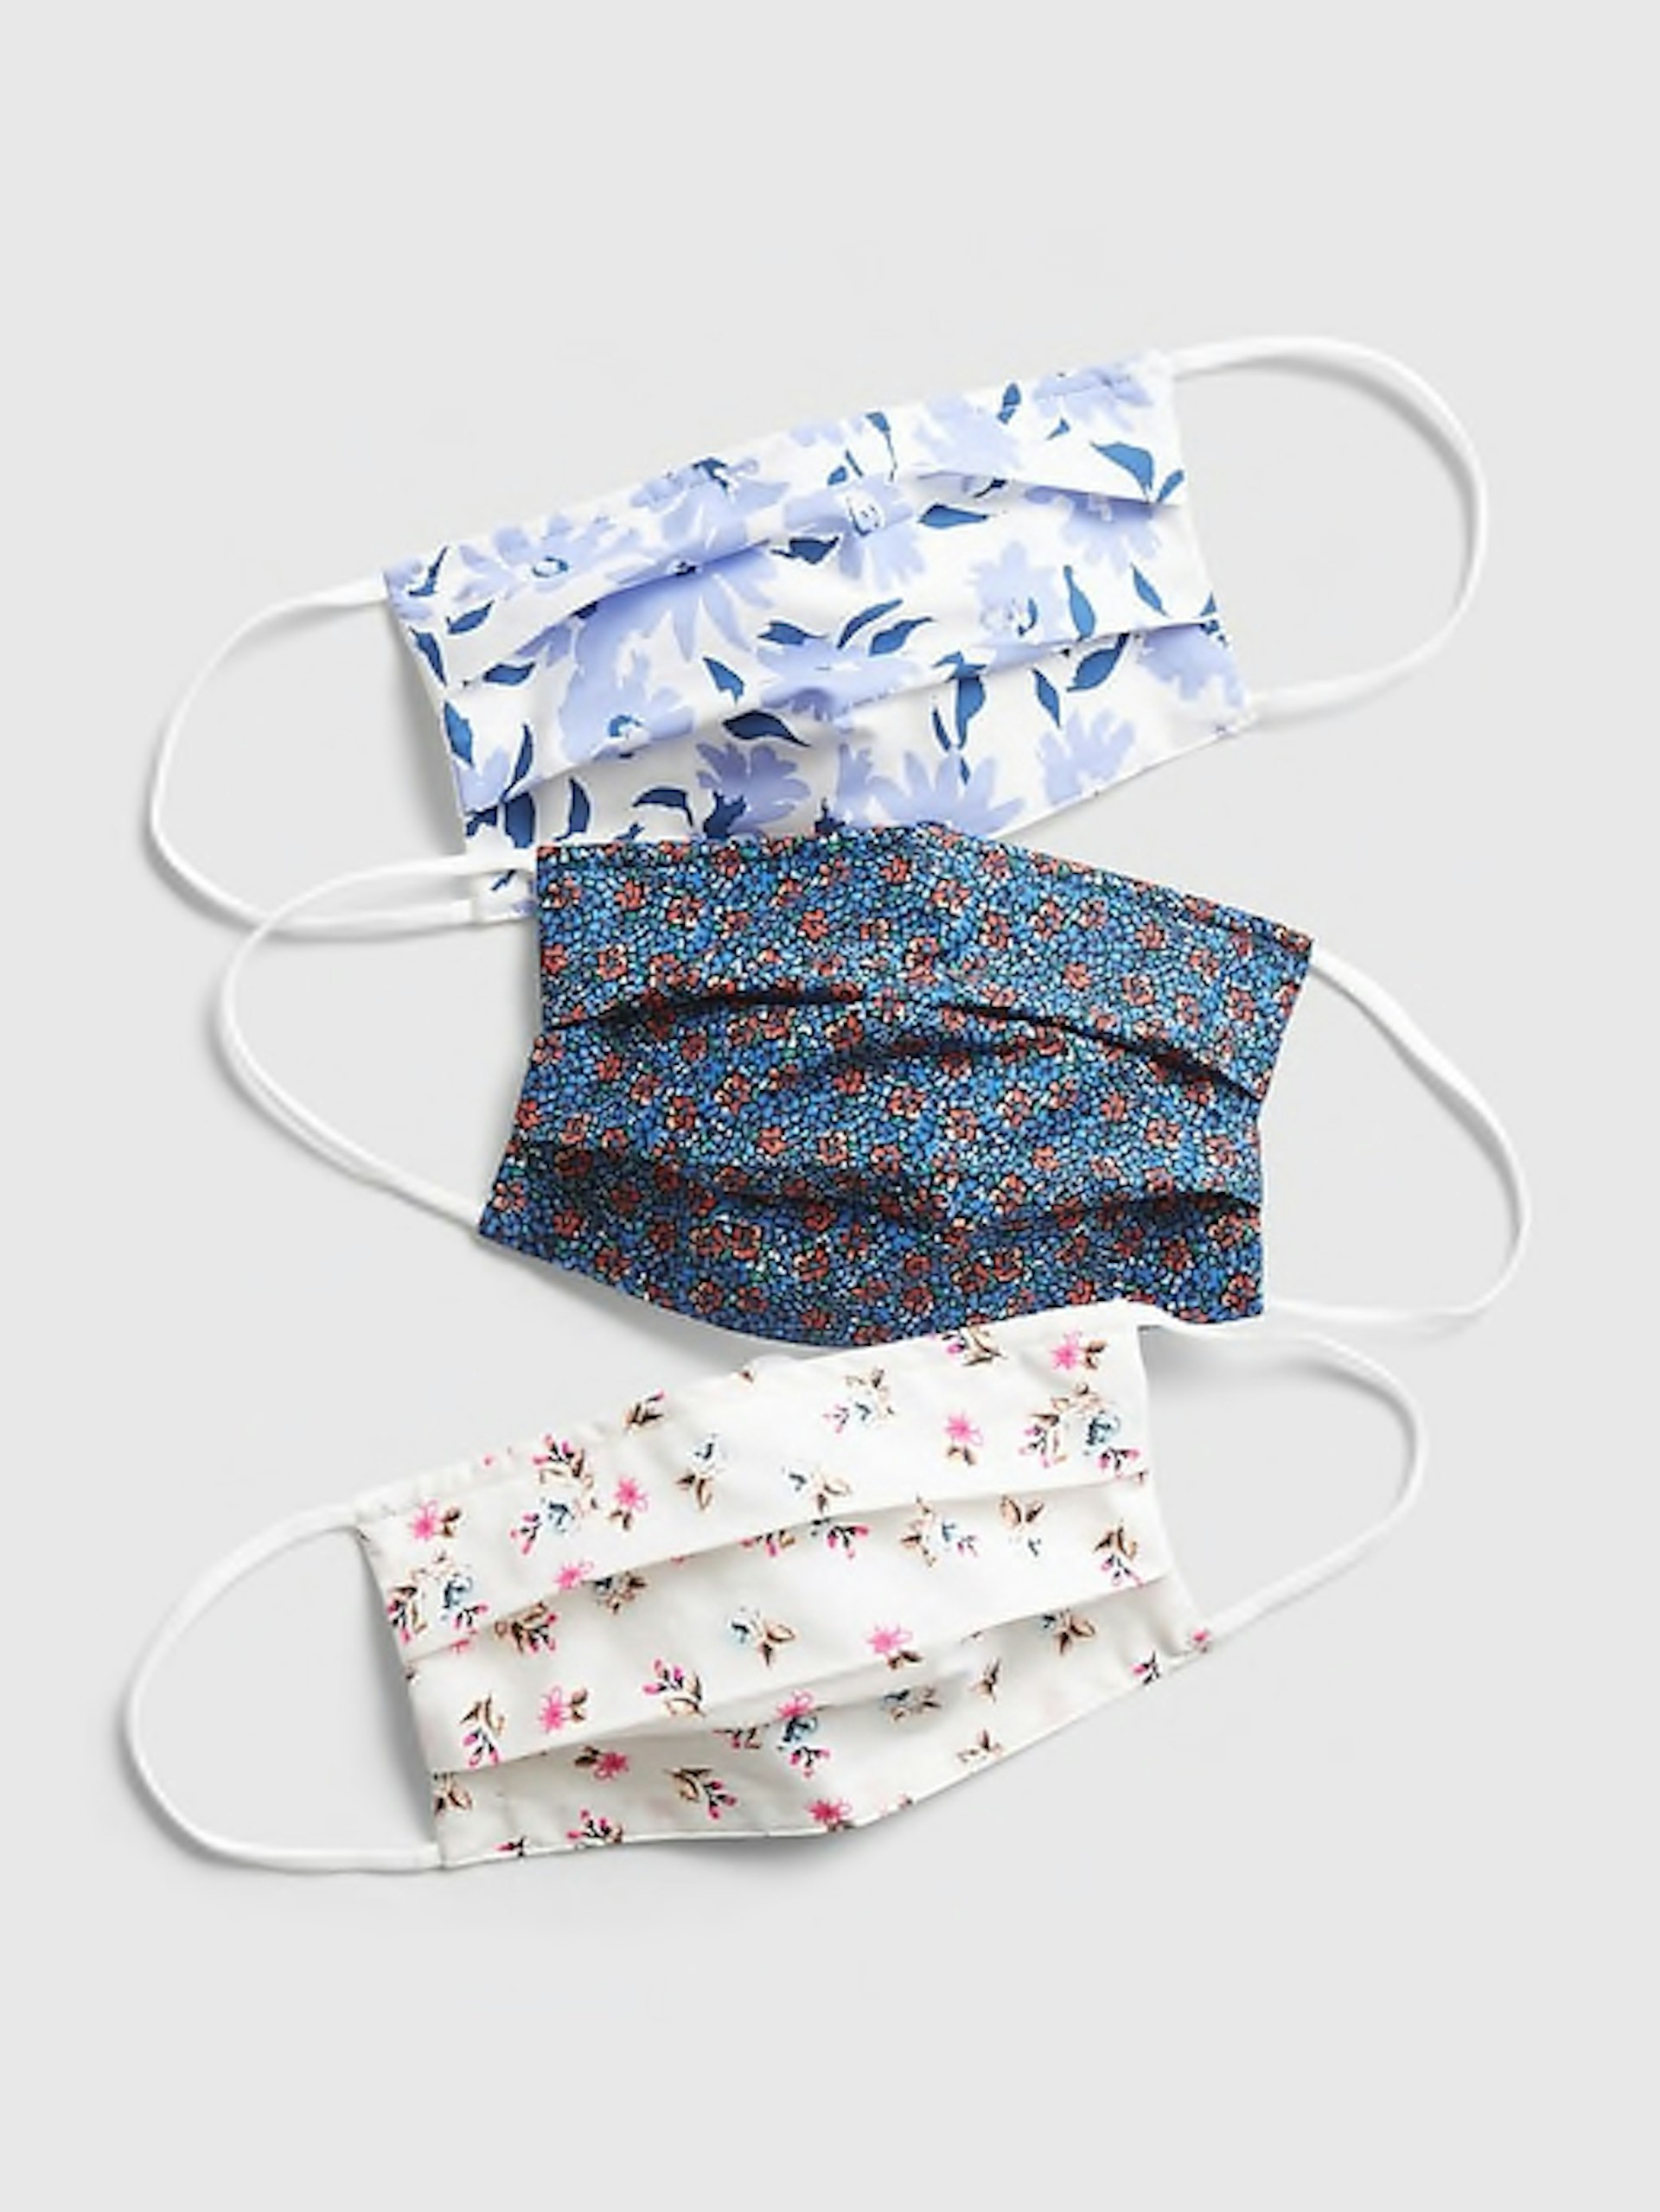 Three face masks with floral patterns